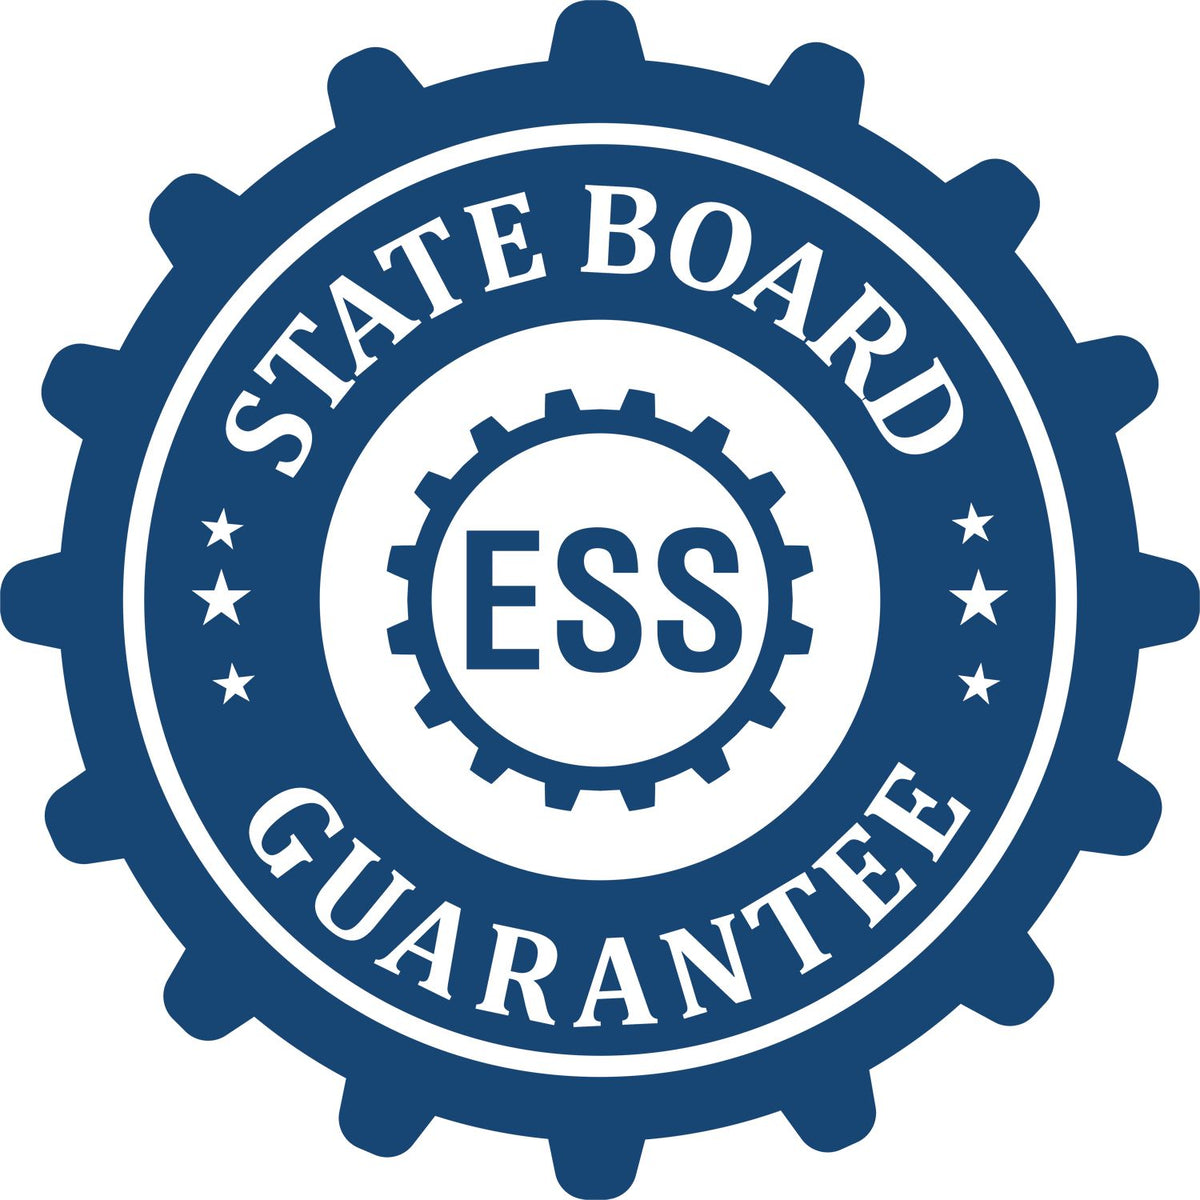 An emblem in a gear shape illustrating a state board guarantee for the Gift Rhode Island Architect Seal